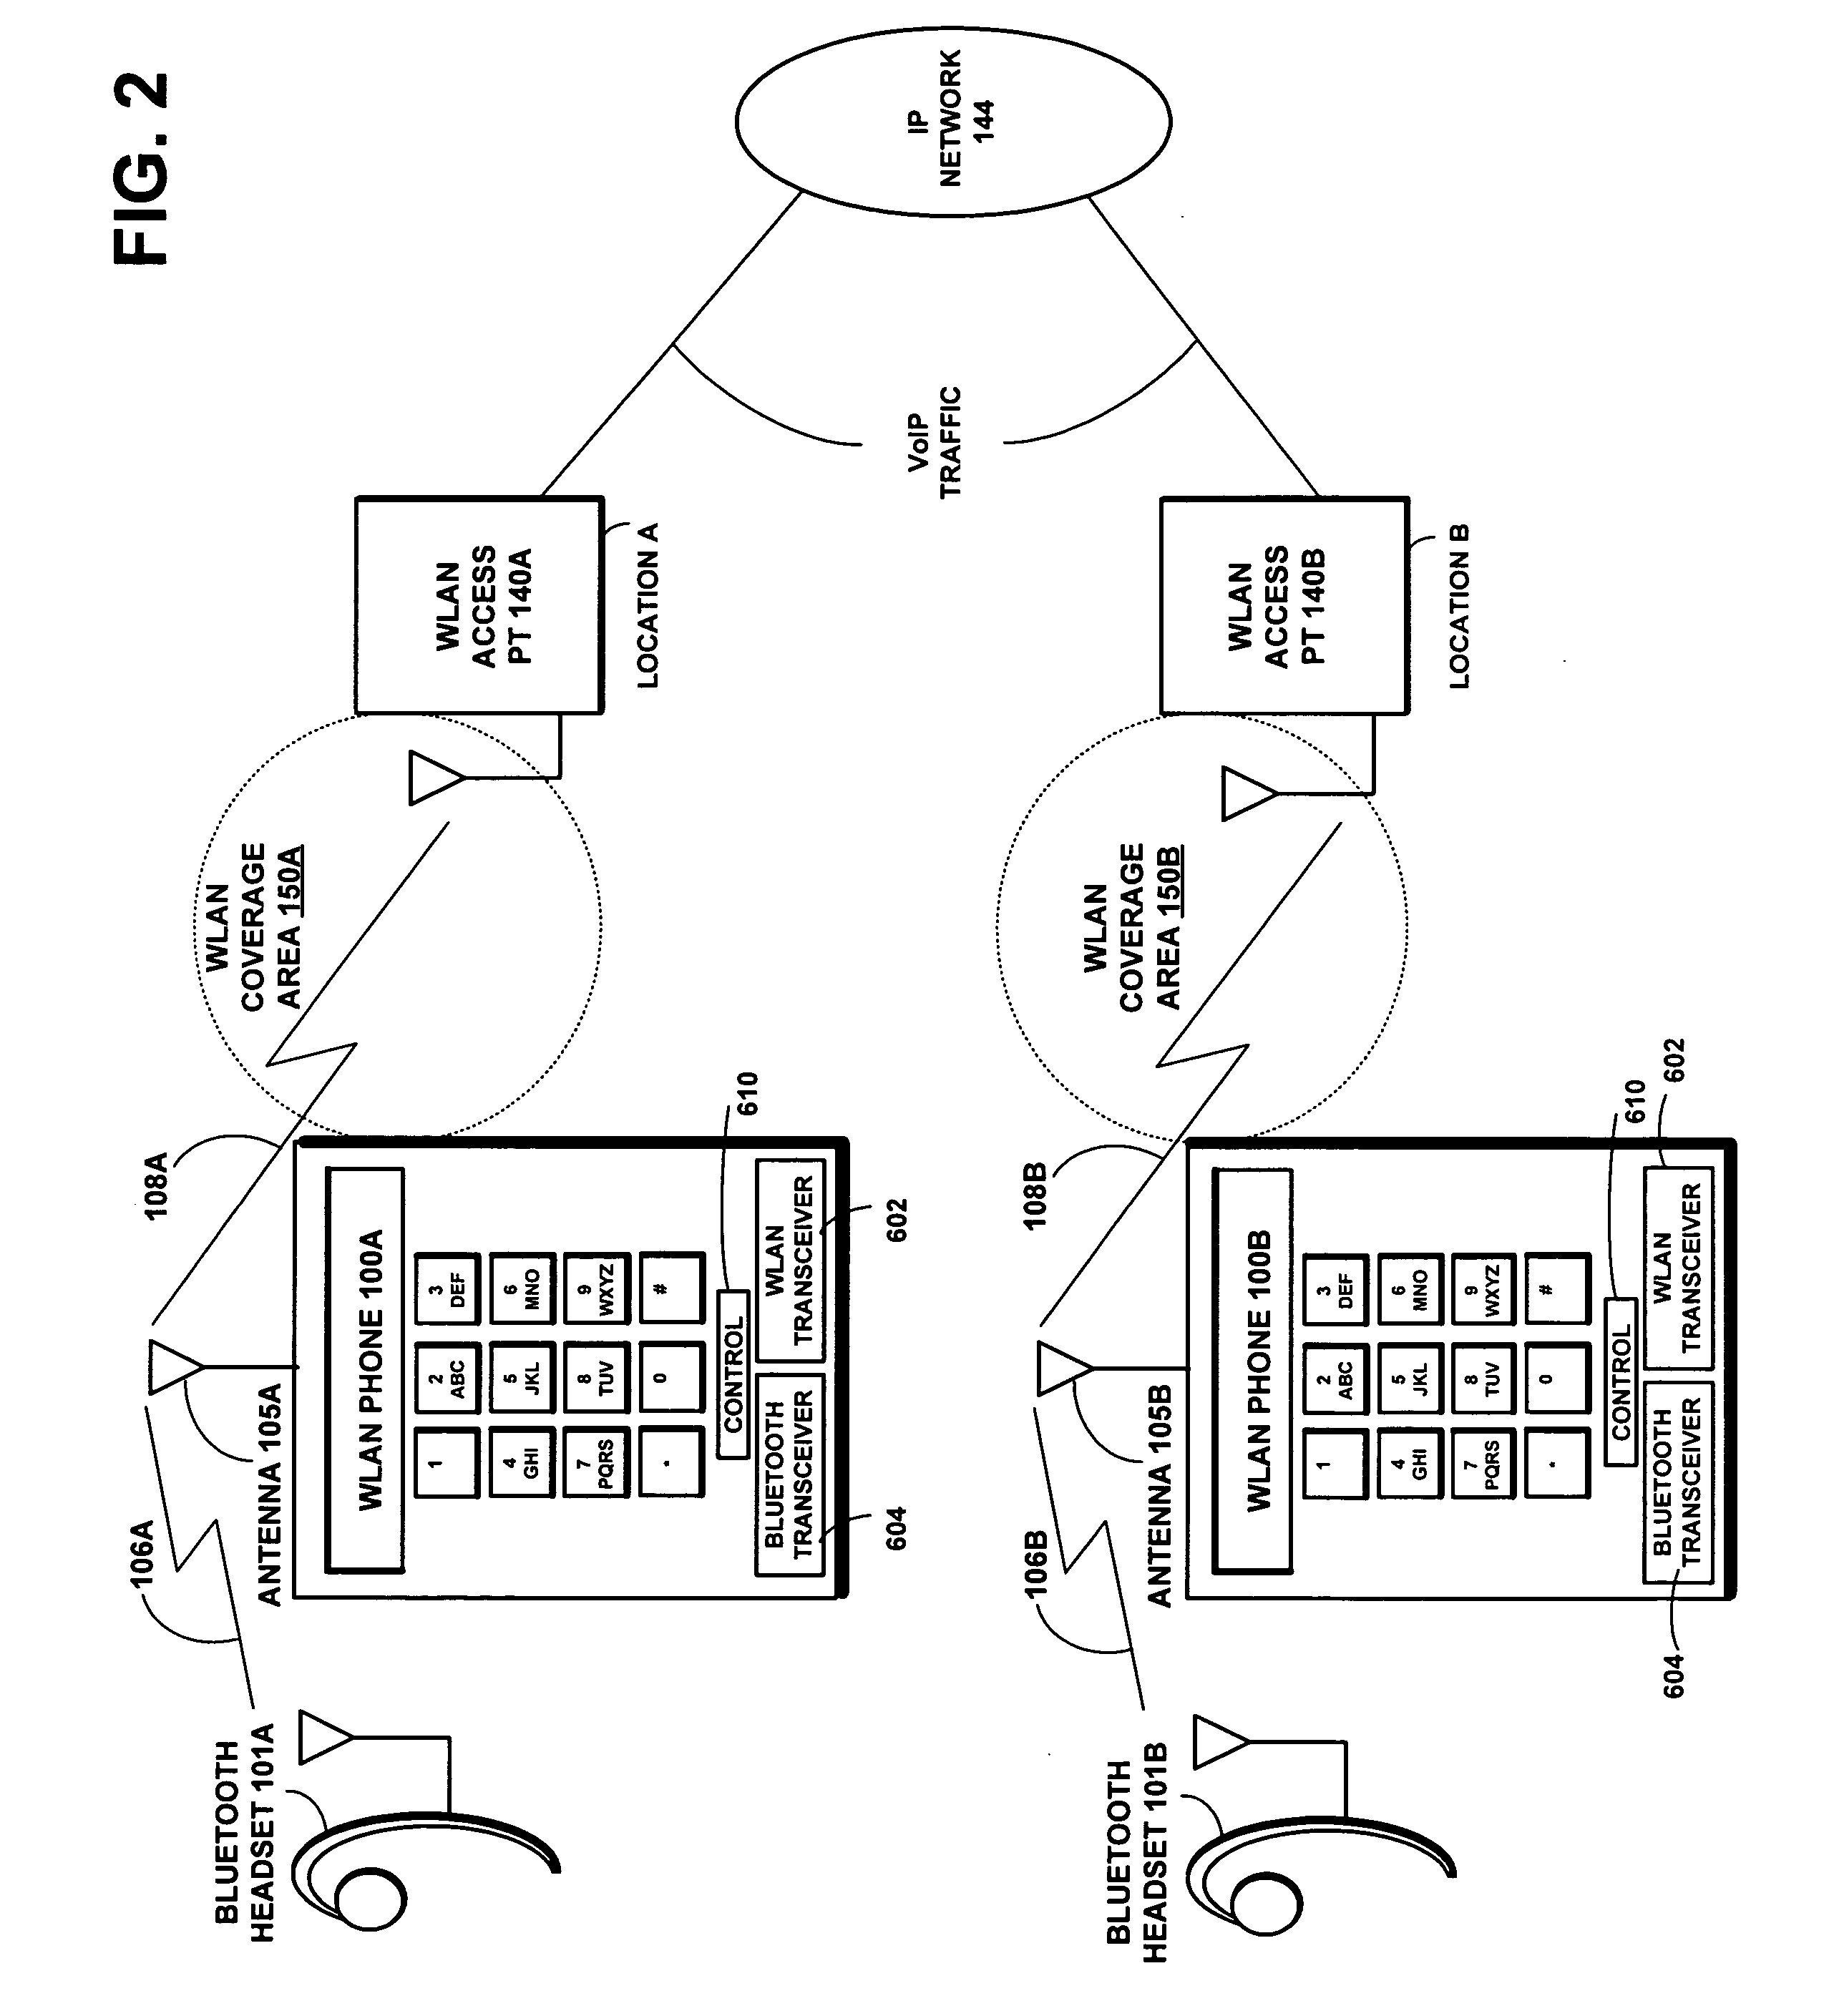 Method and system for VoIP over WLAN to Bluetooth headset using advanced eSCO scheduling